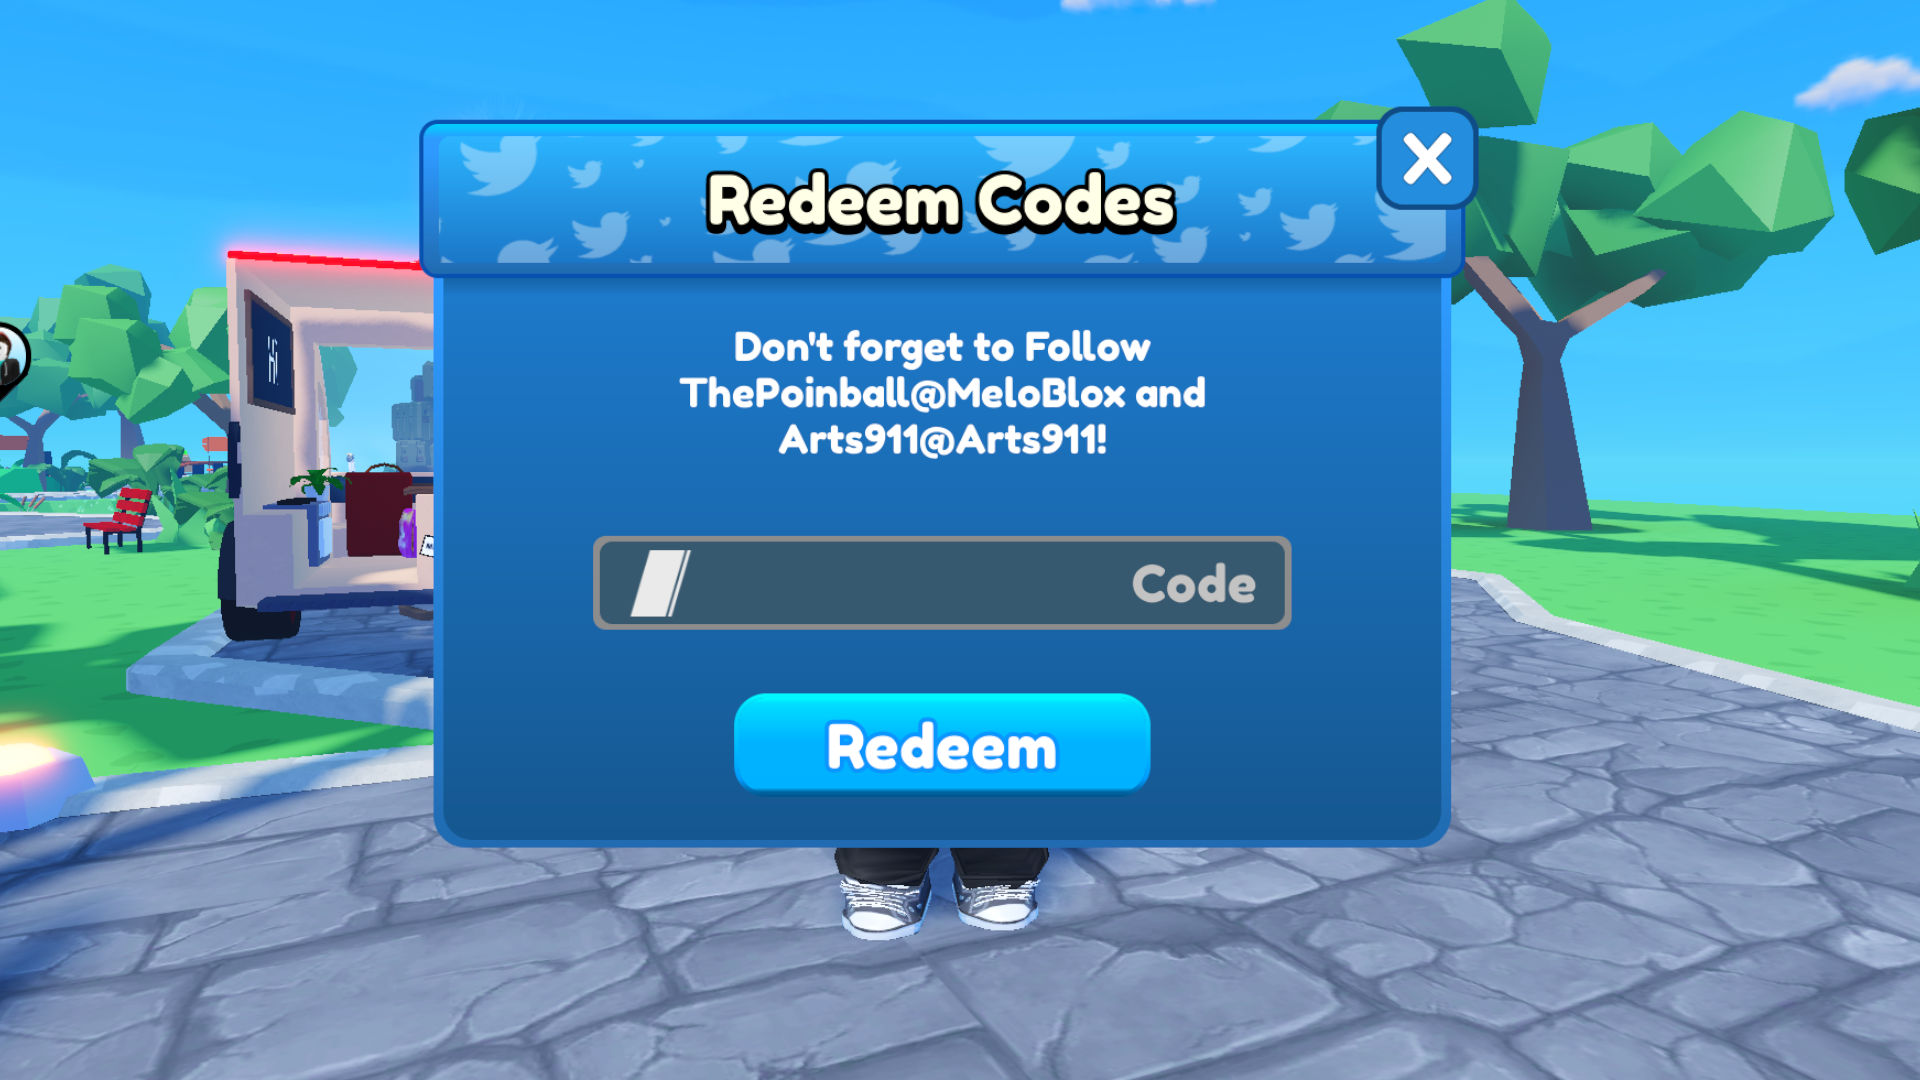 Pls Donate But Infinite Robux Codes - Try Hard Guides